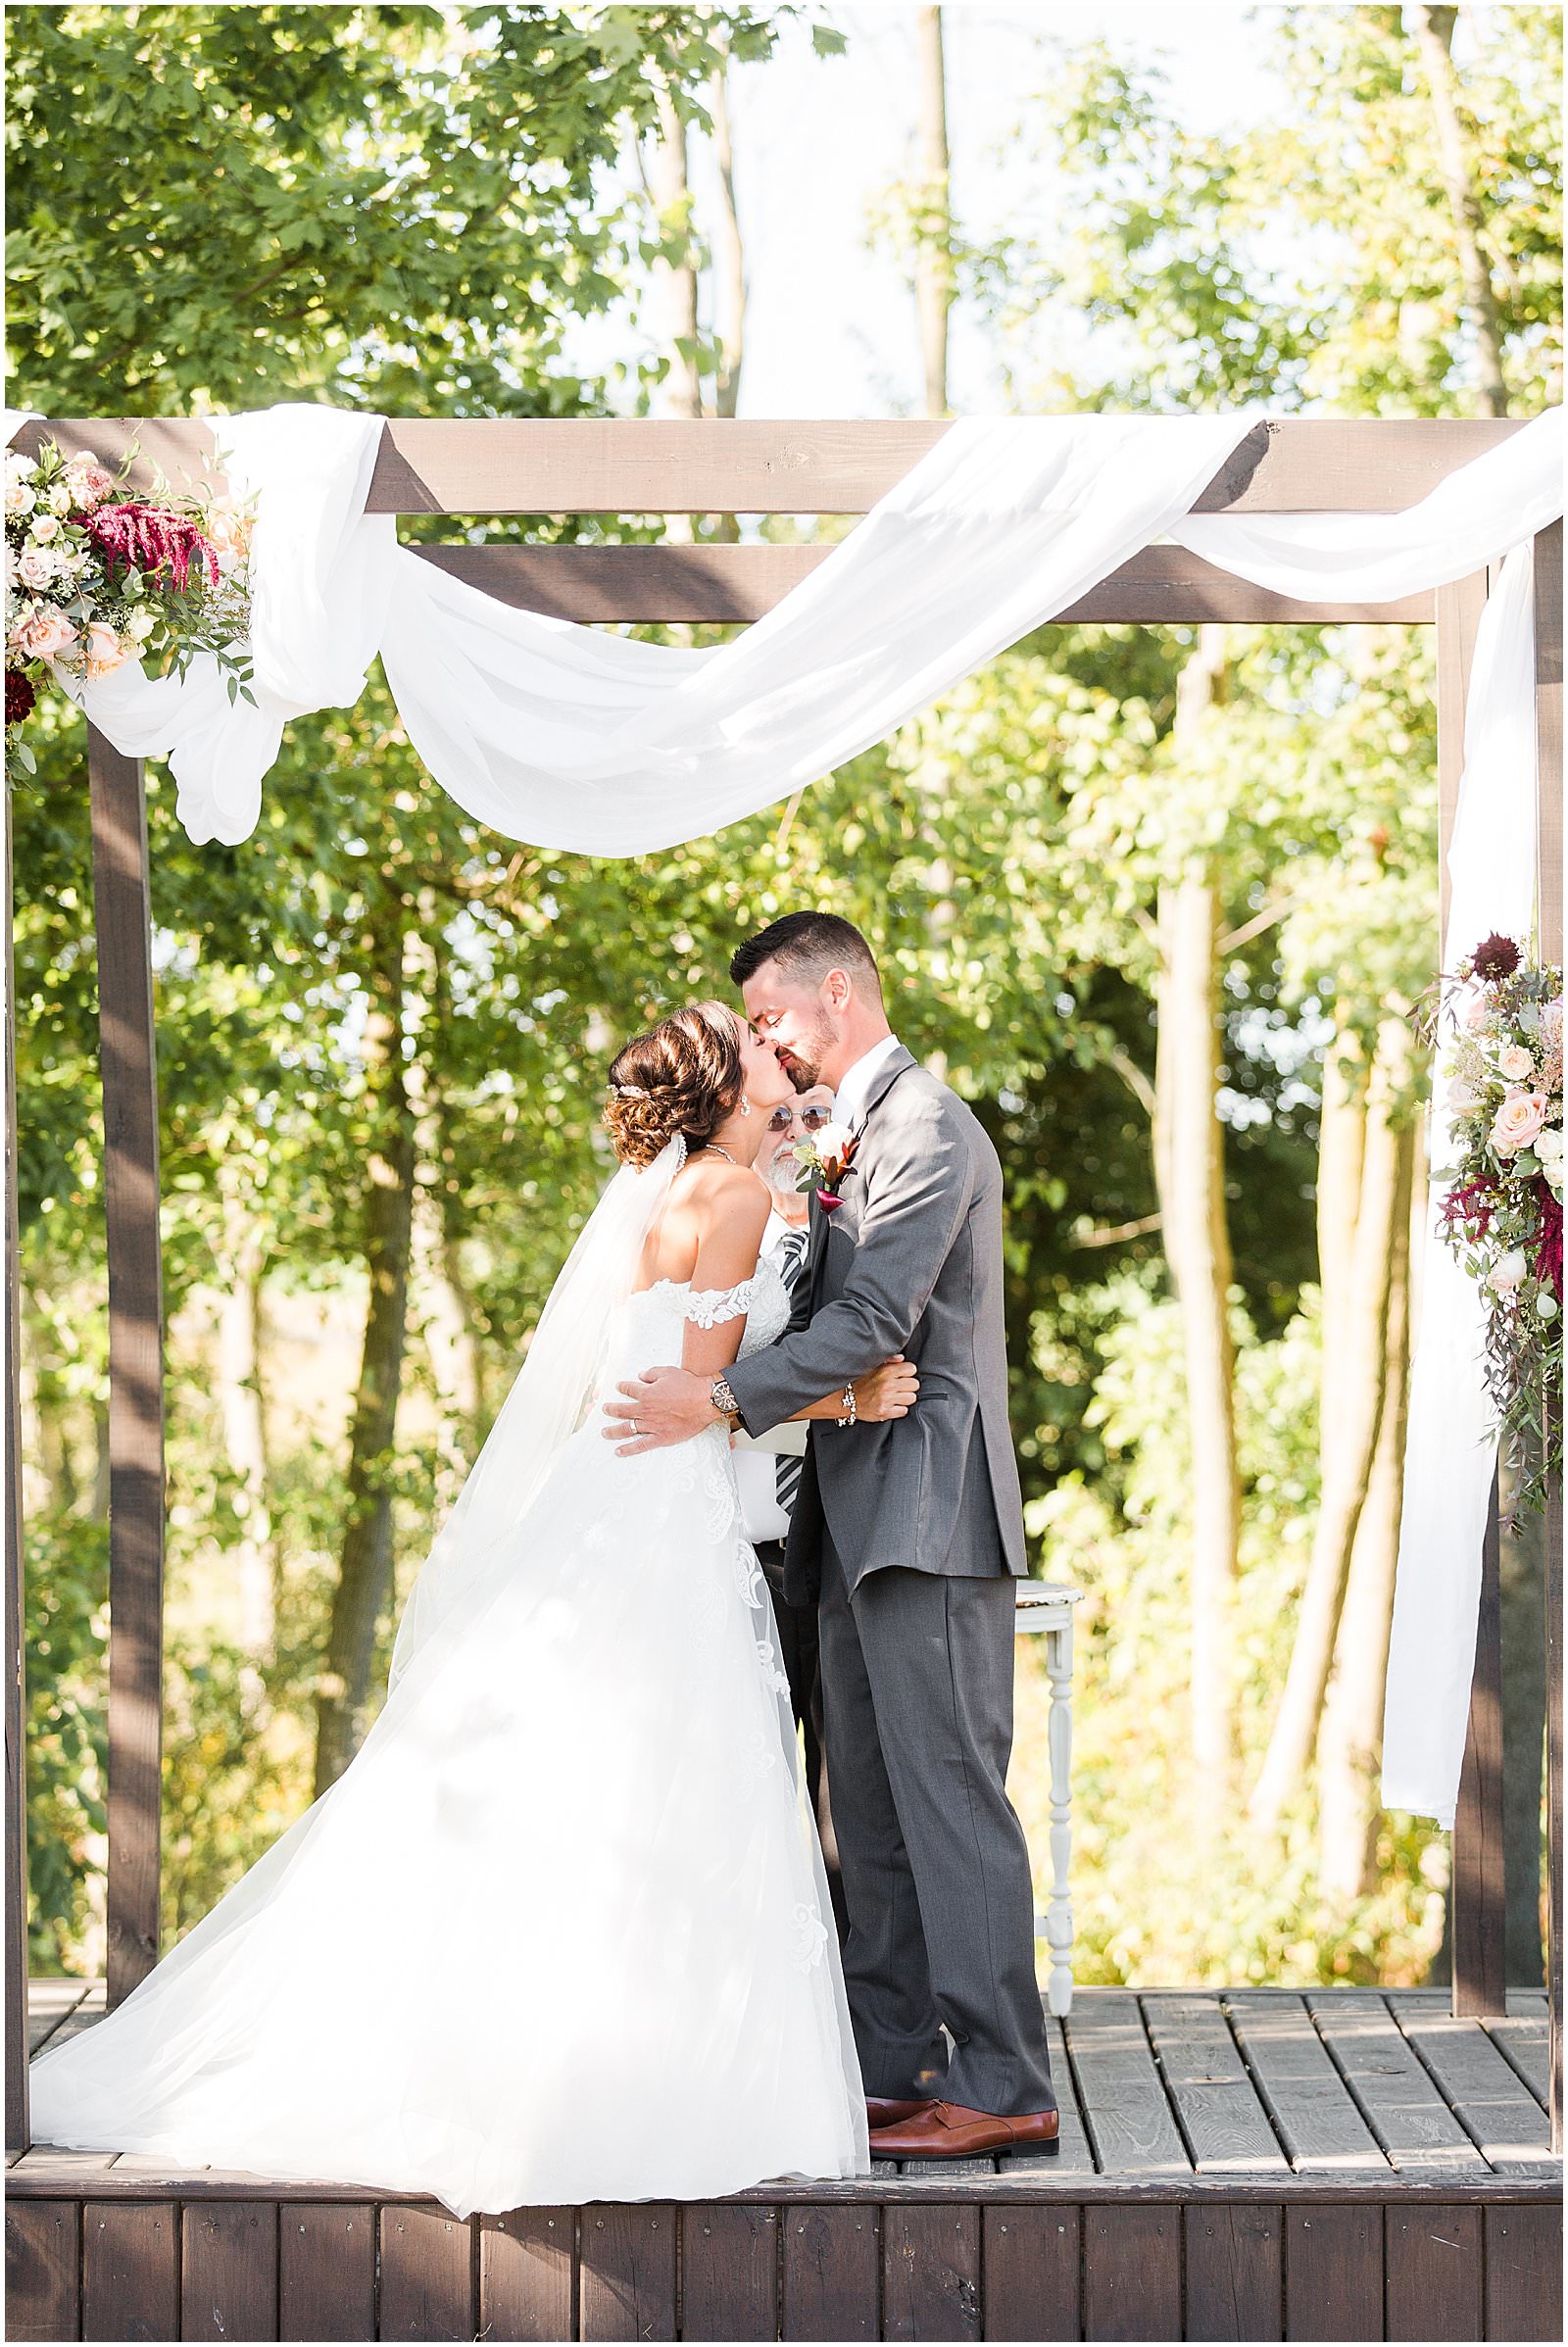 A Stunning Fall Wedding in Indianapolis, IN |. Sally and Andrew | Bret and Brandie Photography 0107.jpg